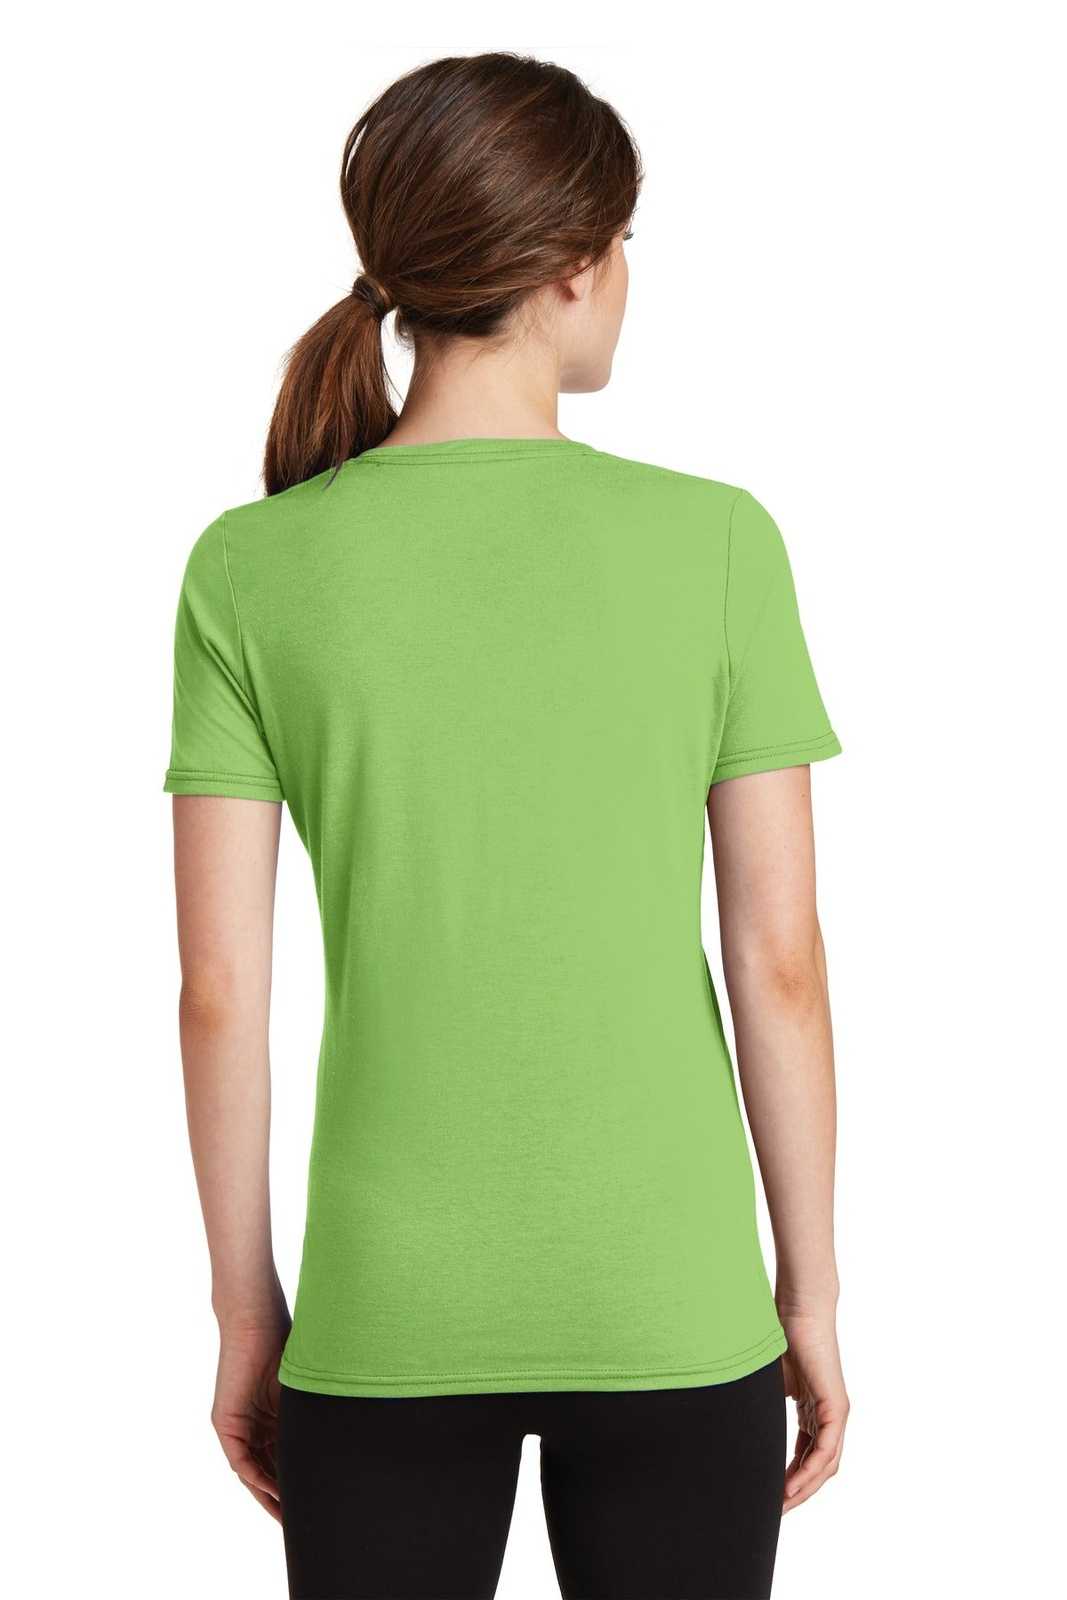 Port &amp; Company LPC381V Ladies Performance Blend V-Neck Tee - Lime - HIT a Double - 2